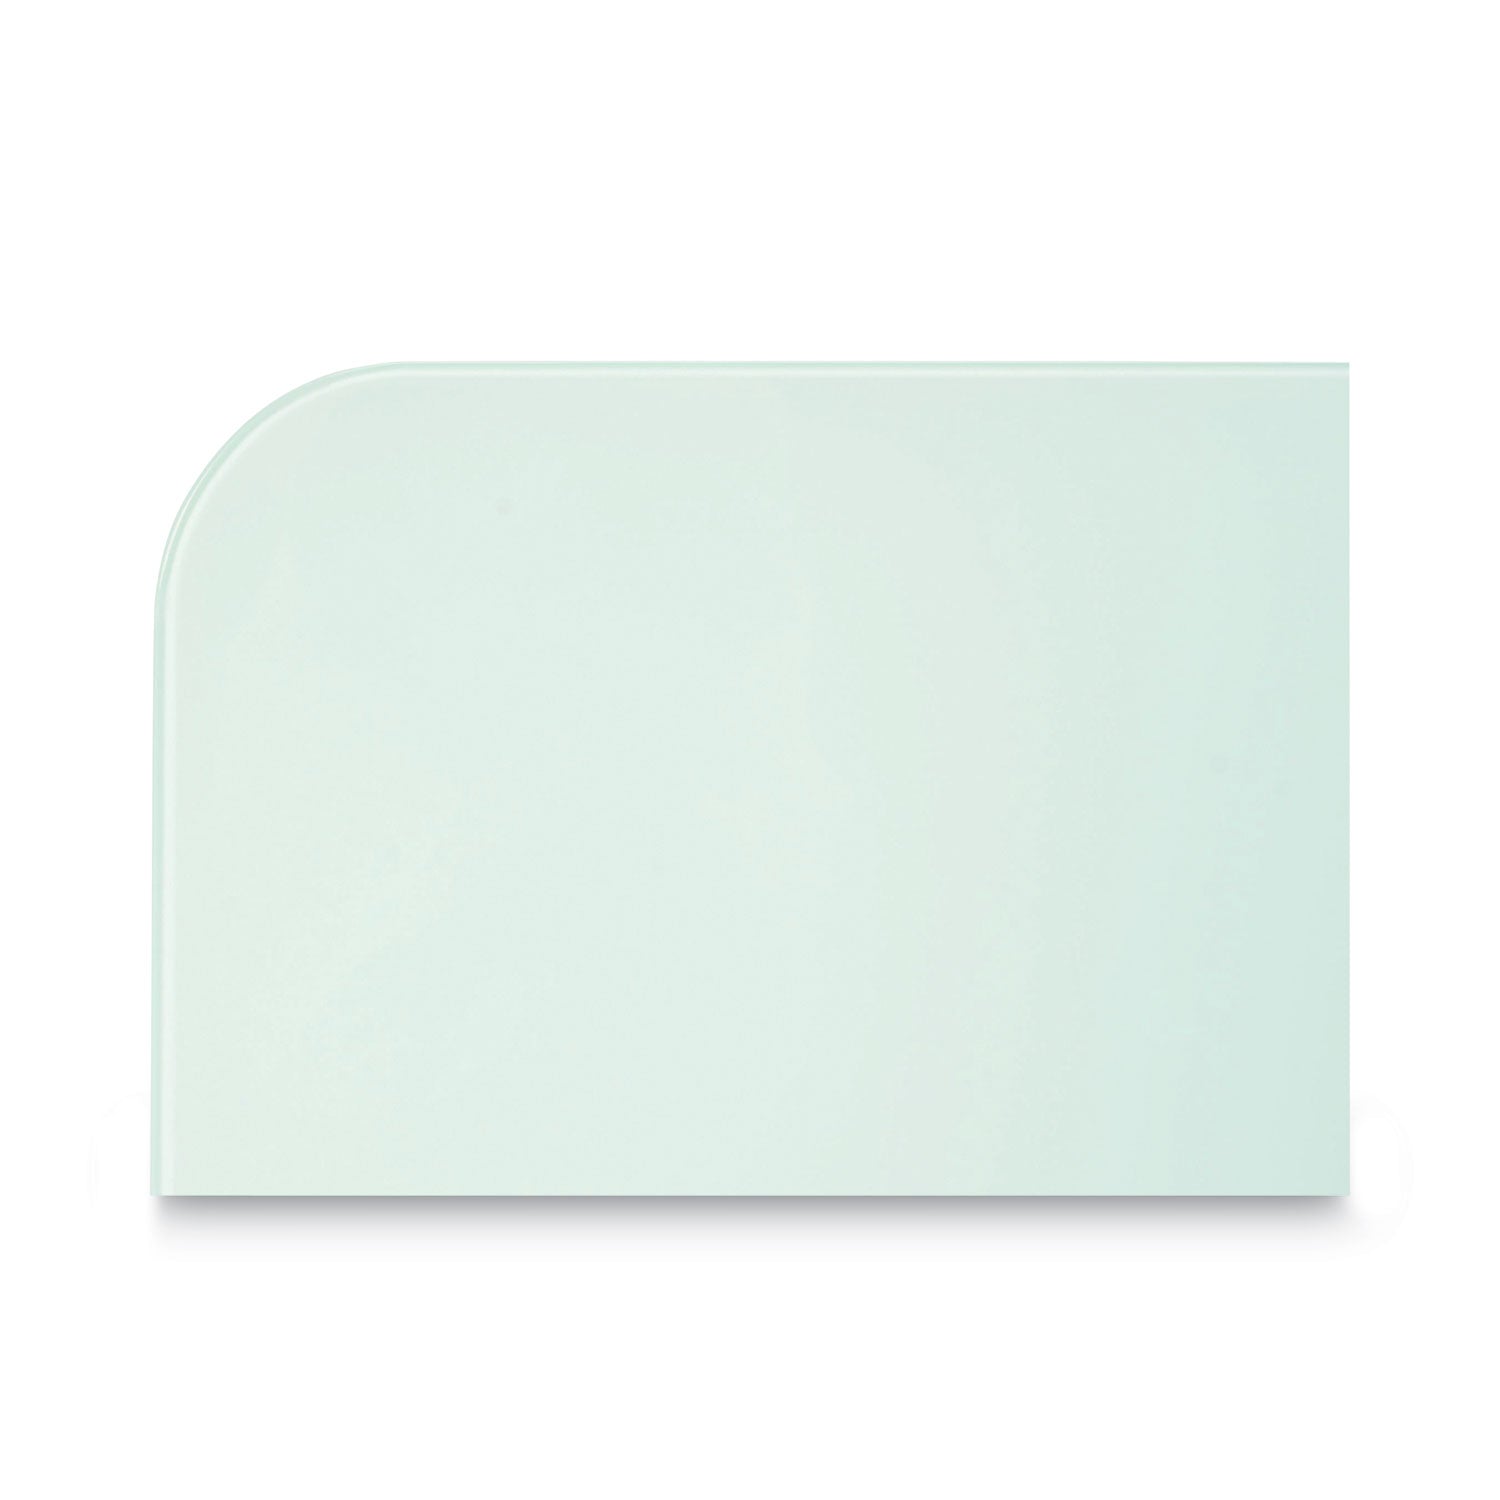 magnetic-glass-dry-erase-board-48-x-36-opaque-white-surface_bvcgl080101 - 8